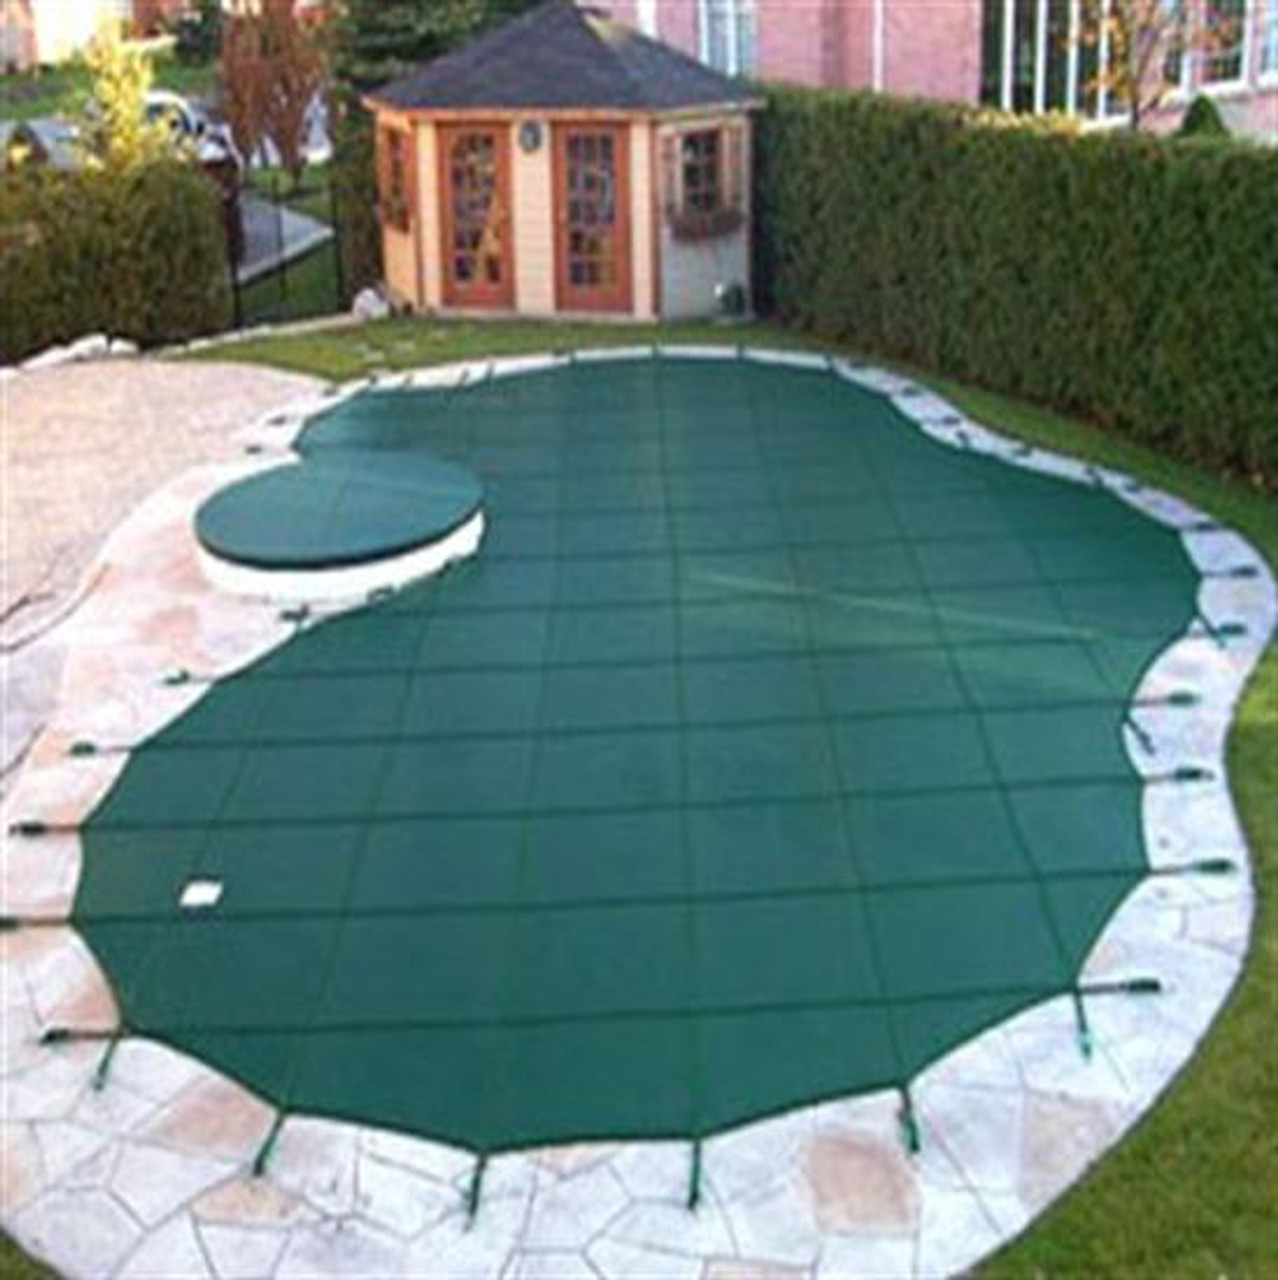 https://cdn11.bigcommerce.com/s-t7k04p4btl/images/stencil/1280x1280/products/3665/3924/mesh-safety-pool-cover-pool-size-12-x-20-green-rectangle-arctic-armor-gold-15-yr-warranty-safety-covers__33066.1604950701.jpg?c=1